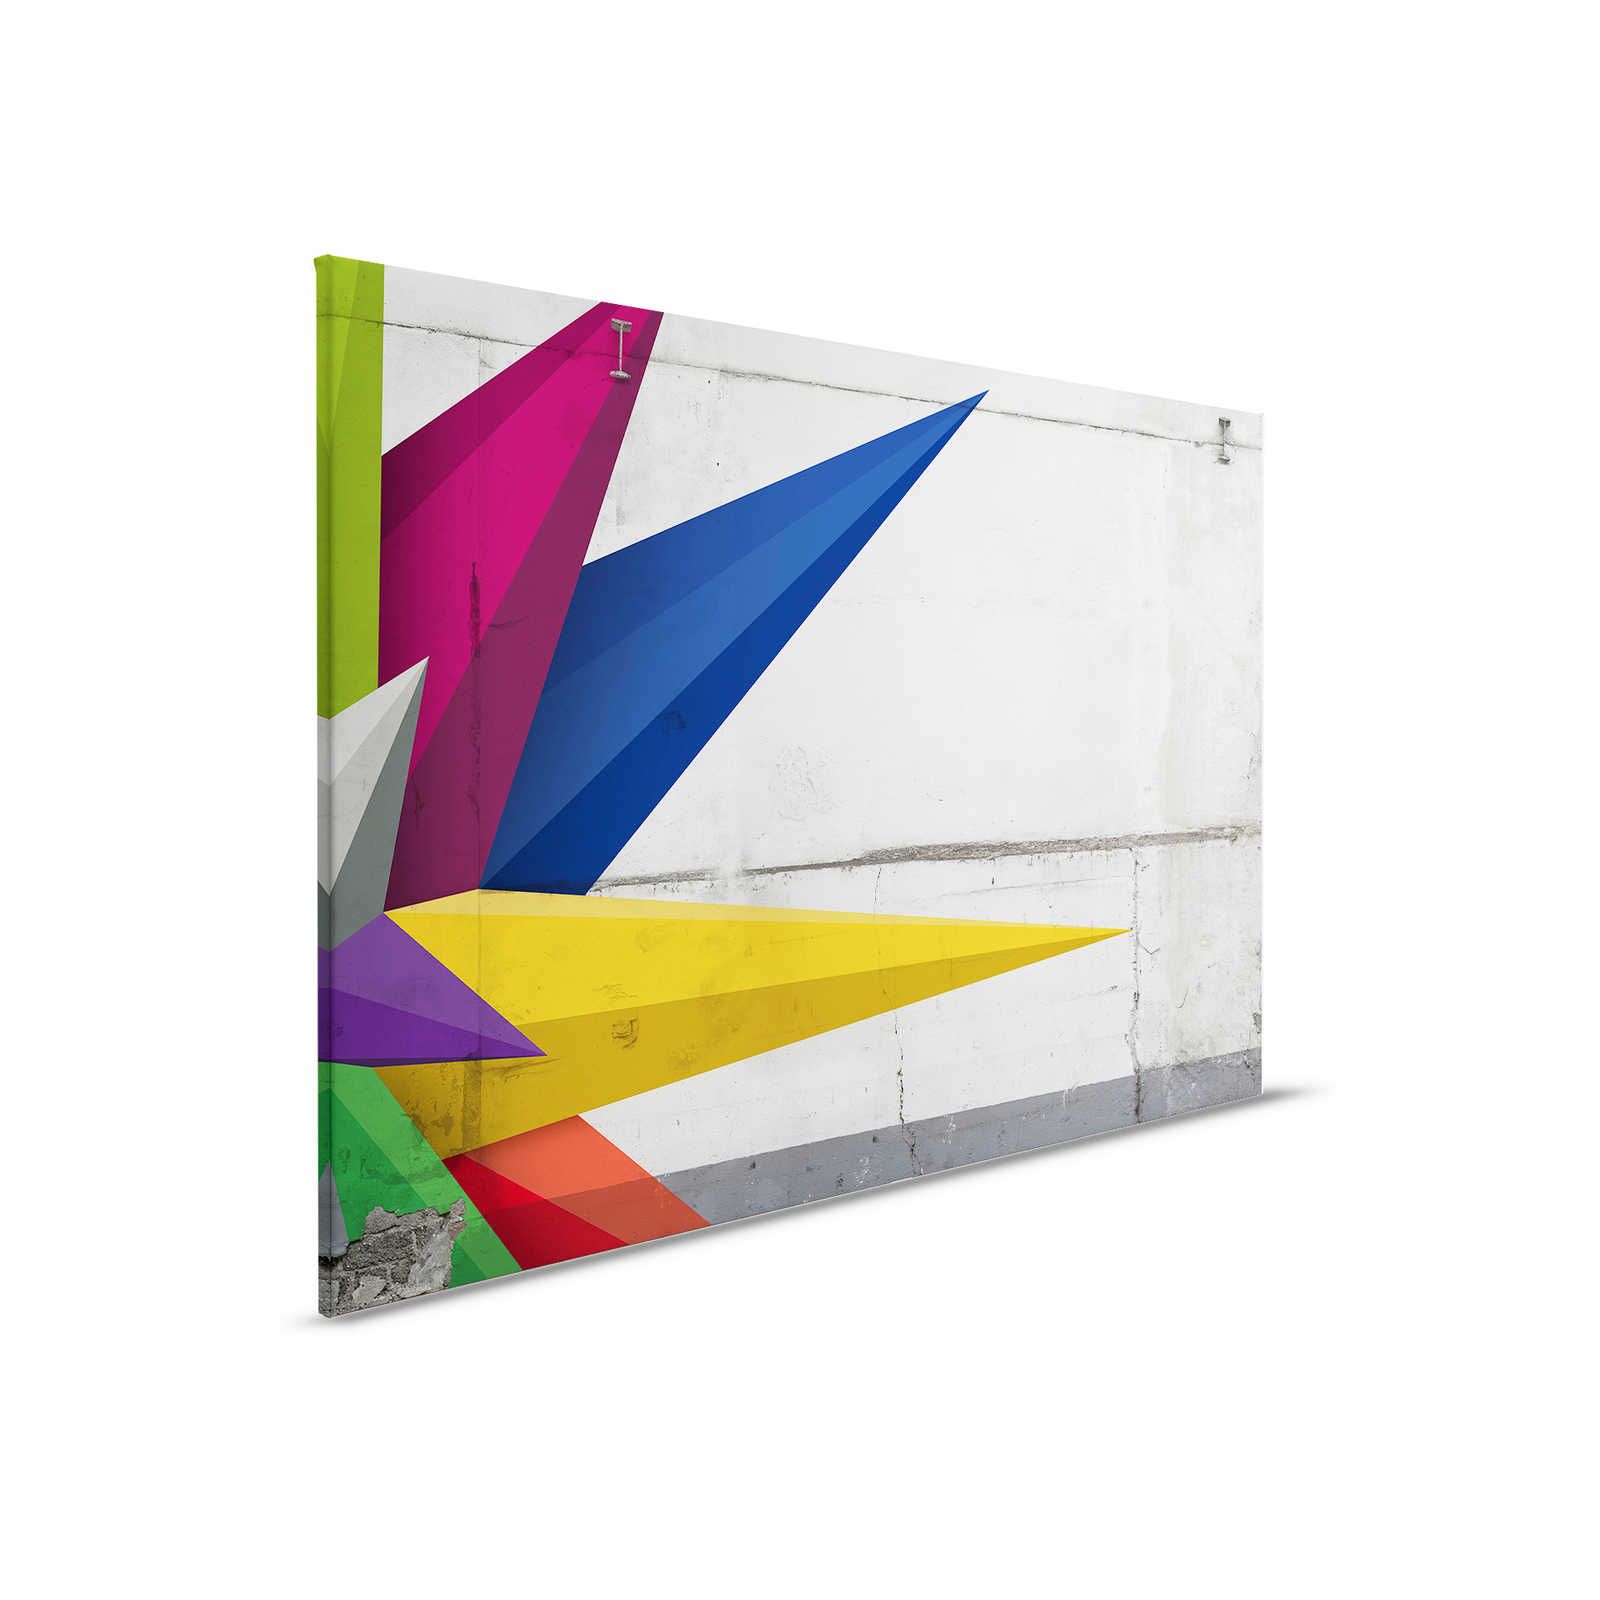         Canvas painting concrete look with graphic design - 0,90 m x 0,60 m
    